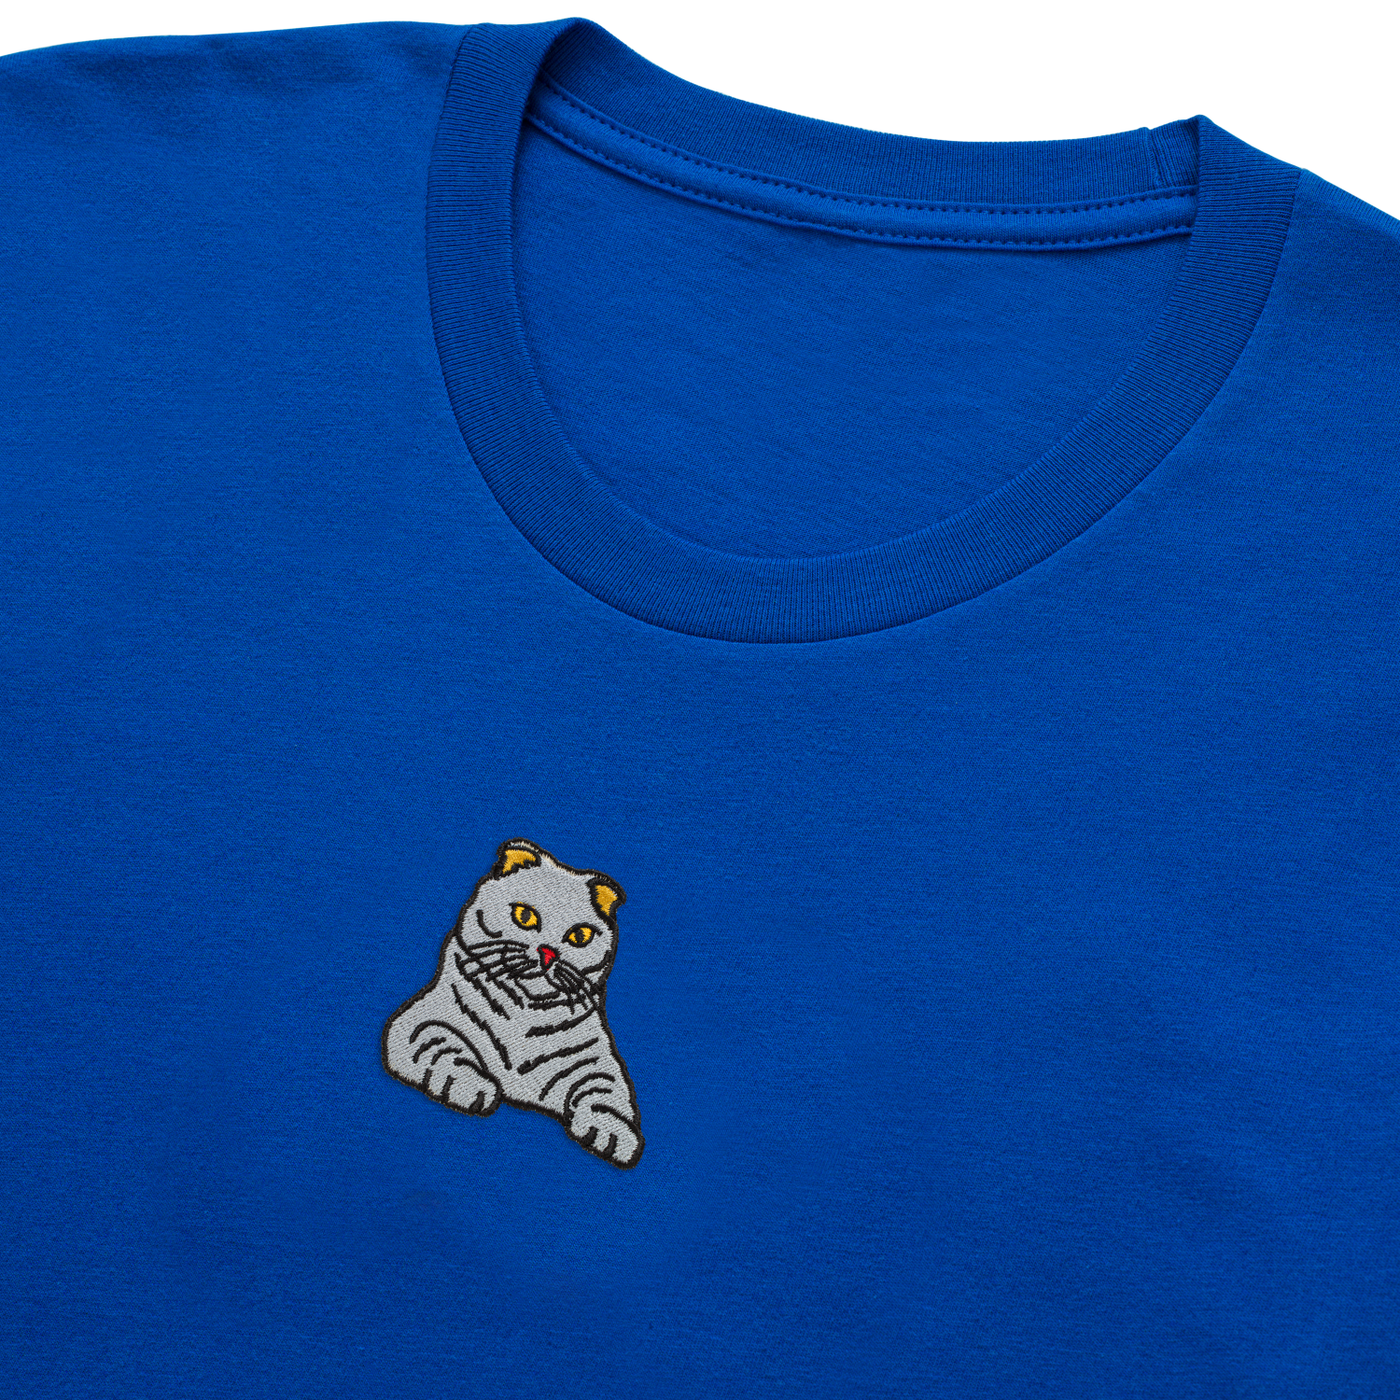 Bobby's Planet Men's Embroidered Scottish Fold T-Shirt from Paws Dog Cat Animals Collection in True Royal Color#color_true-royal